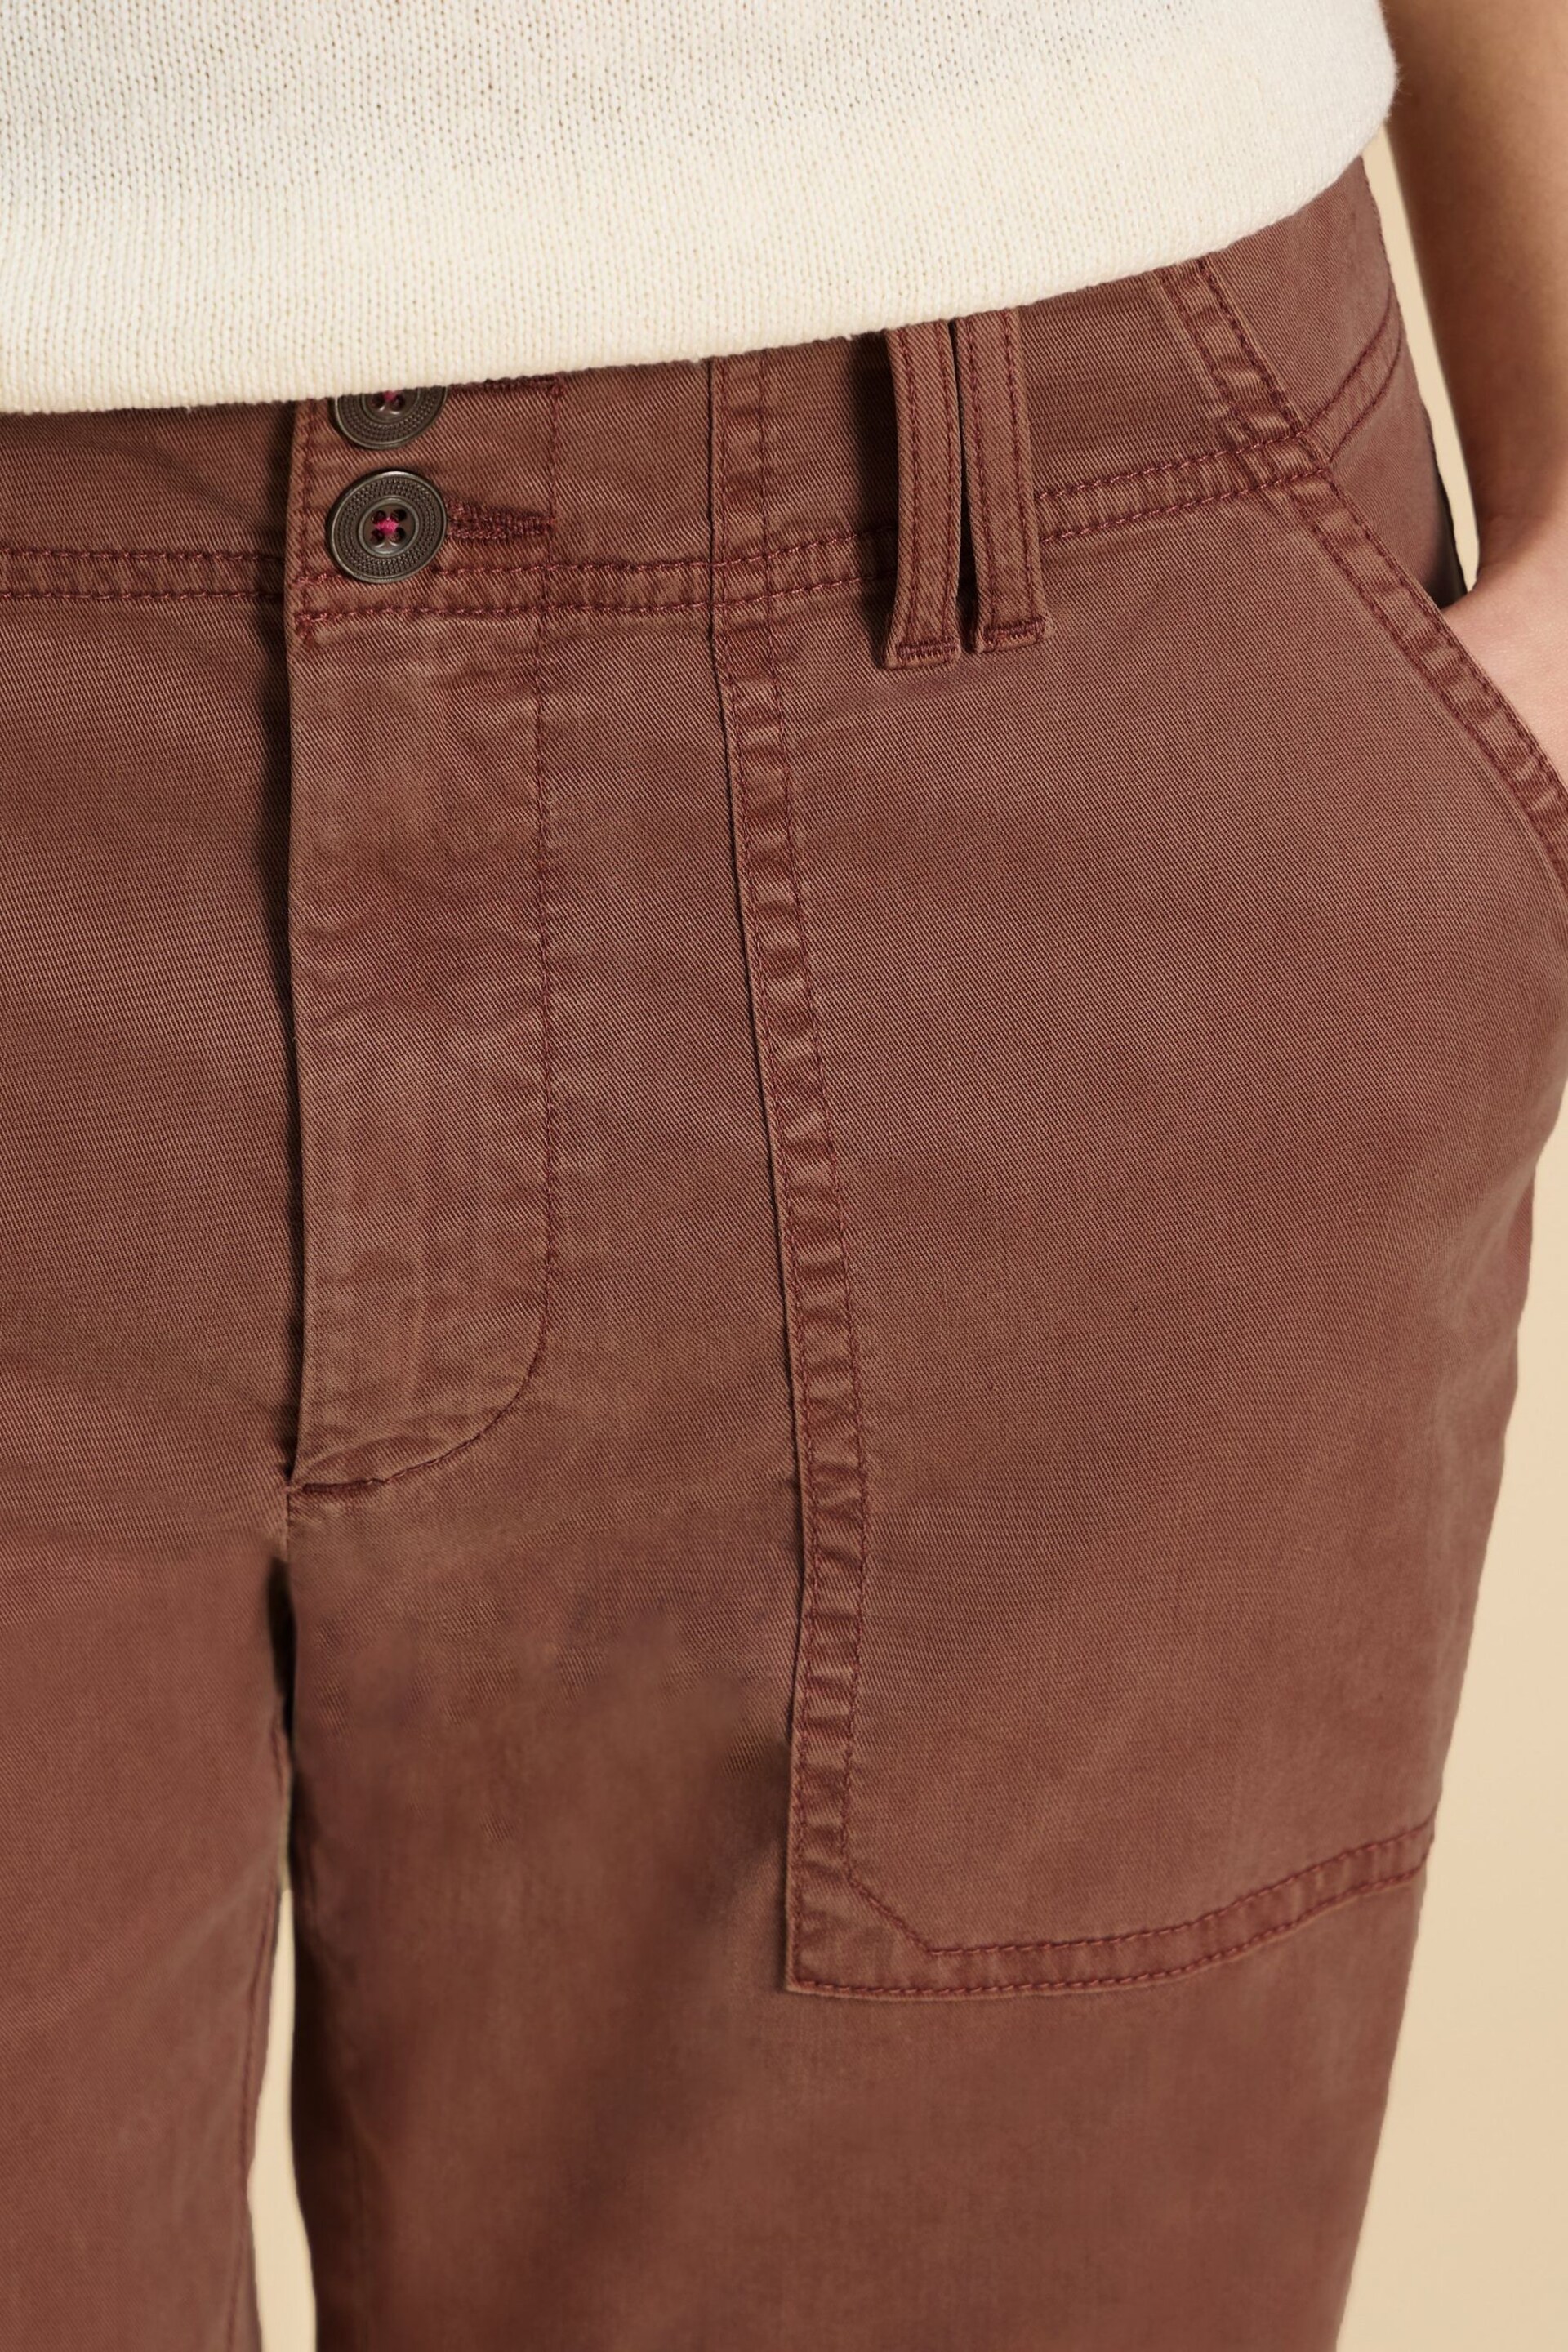 White Stuff Brown Blaire Trousers - Image 4 of 7